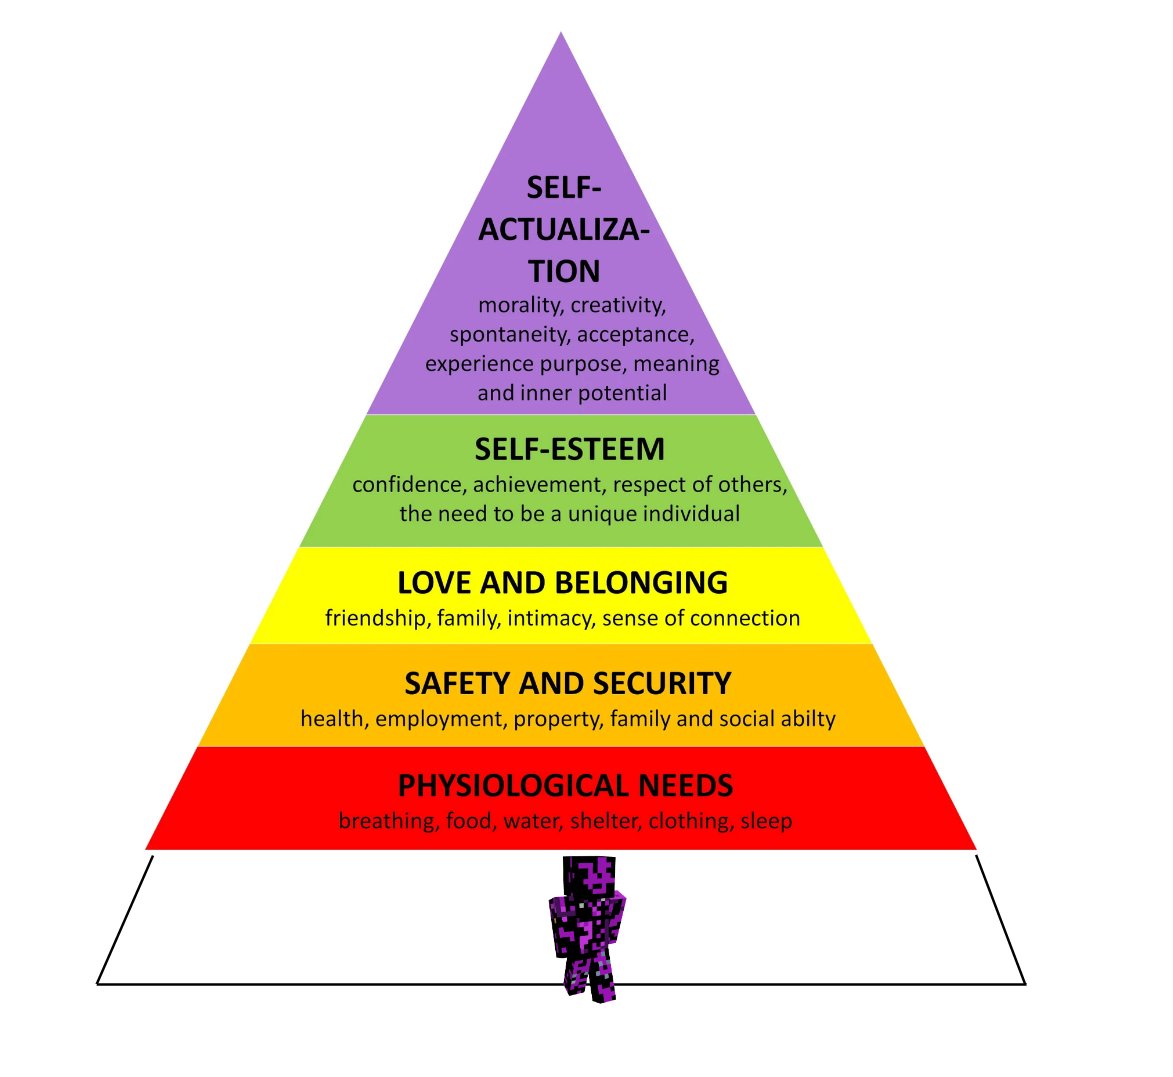 maslow's hierarchy of needs /j